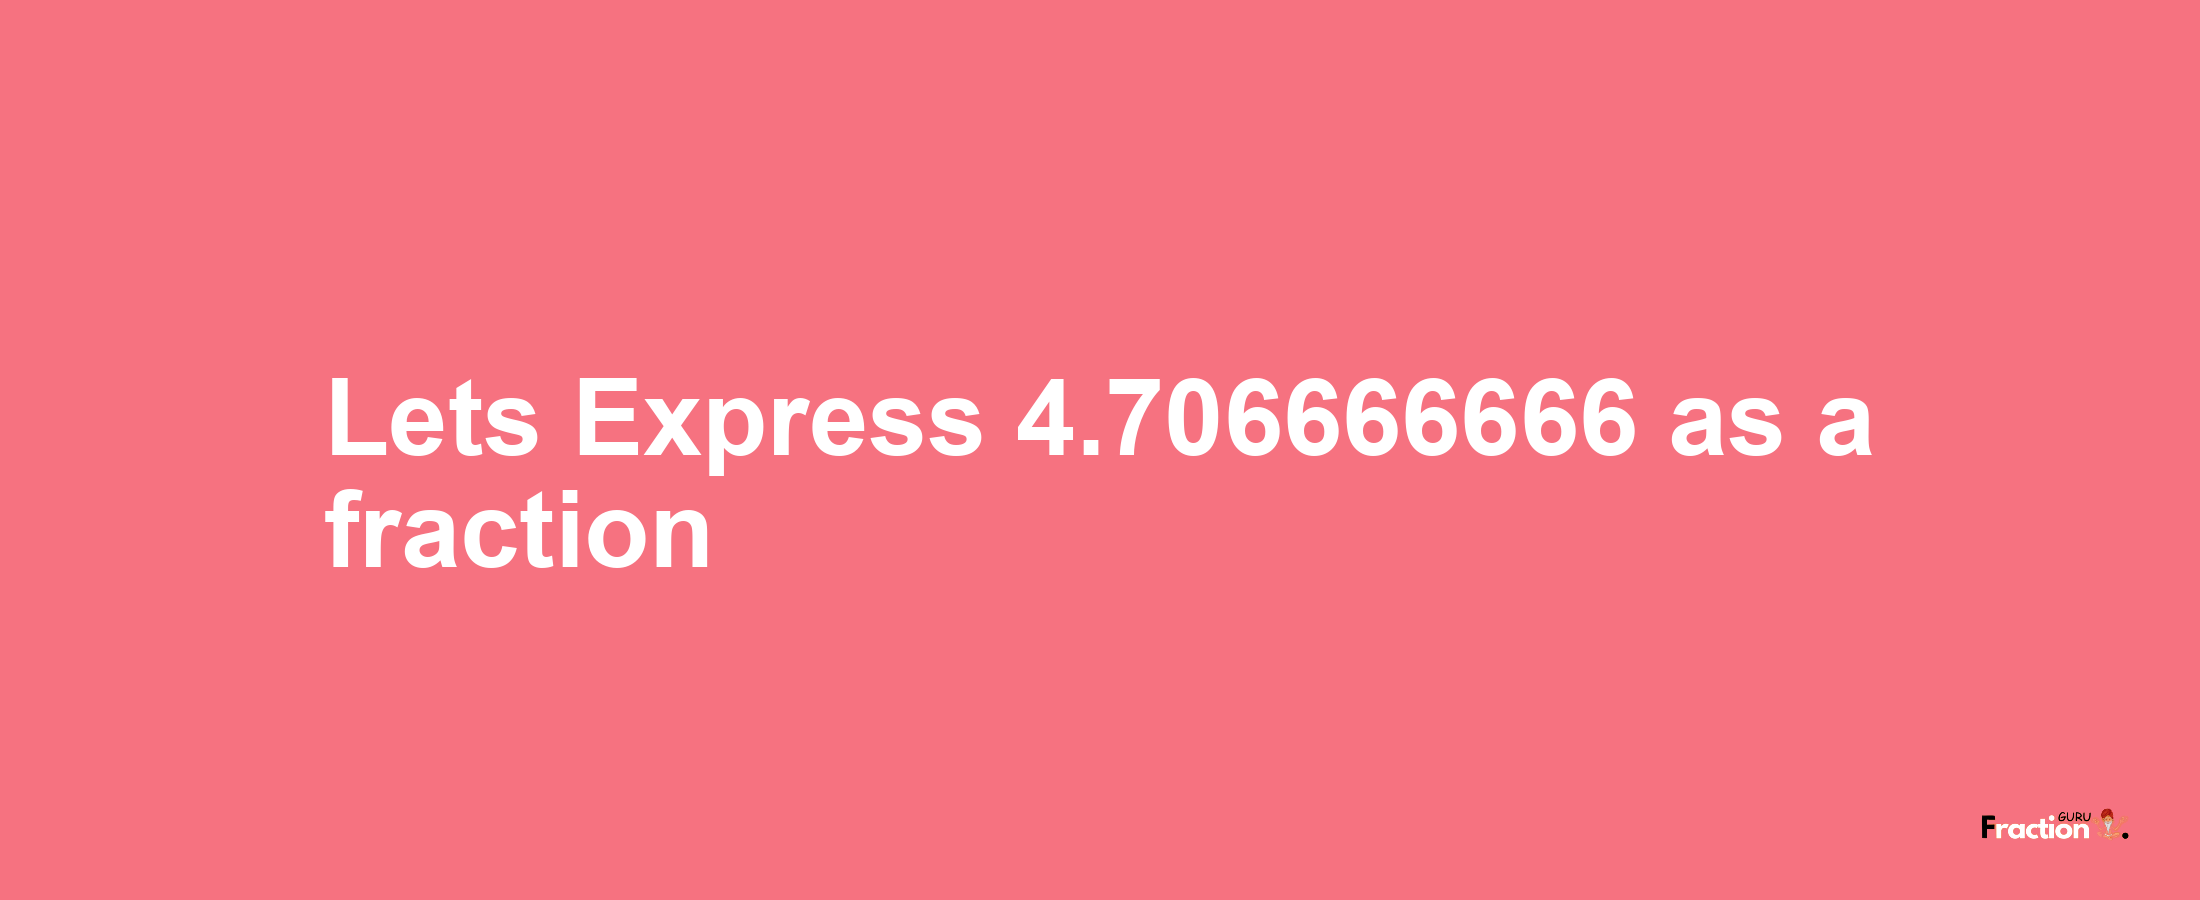 Lets Express 4.706666666 as afraction